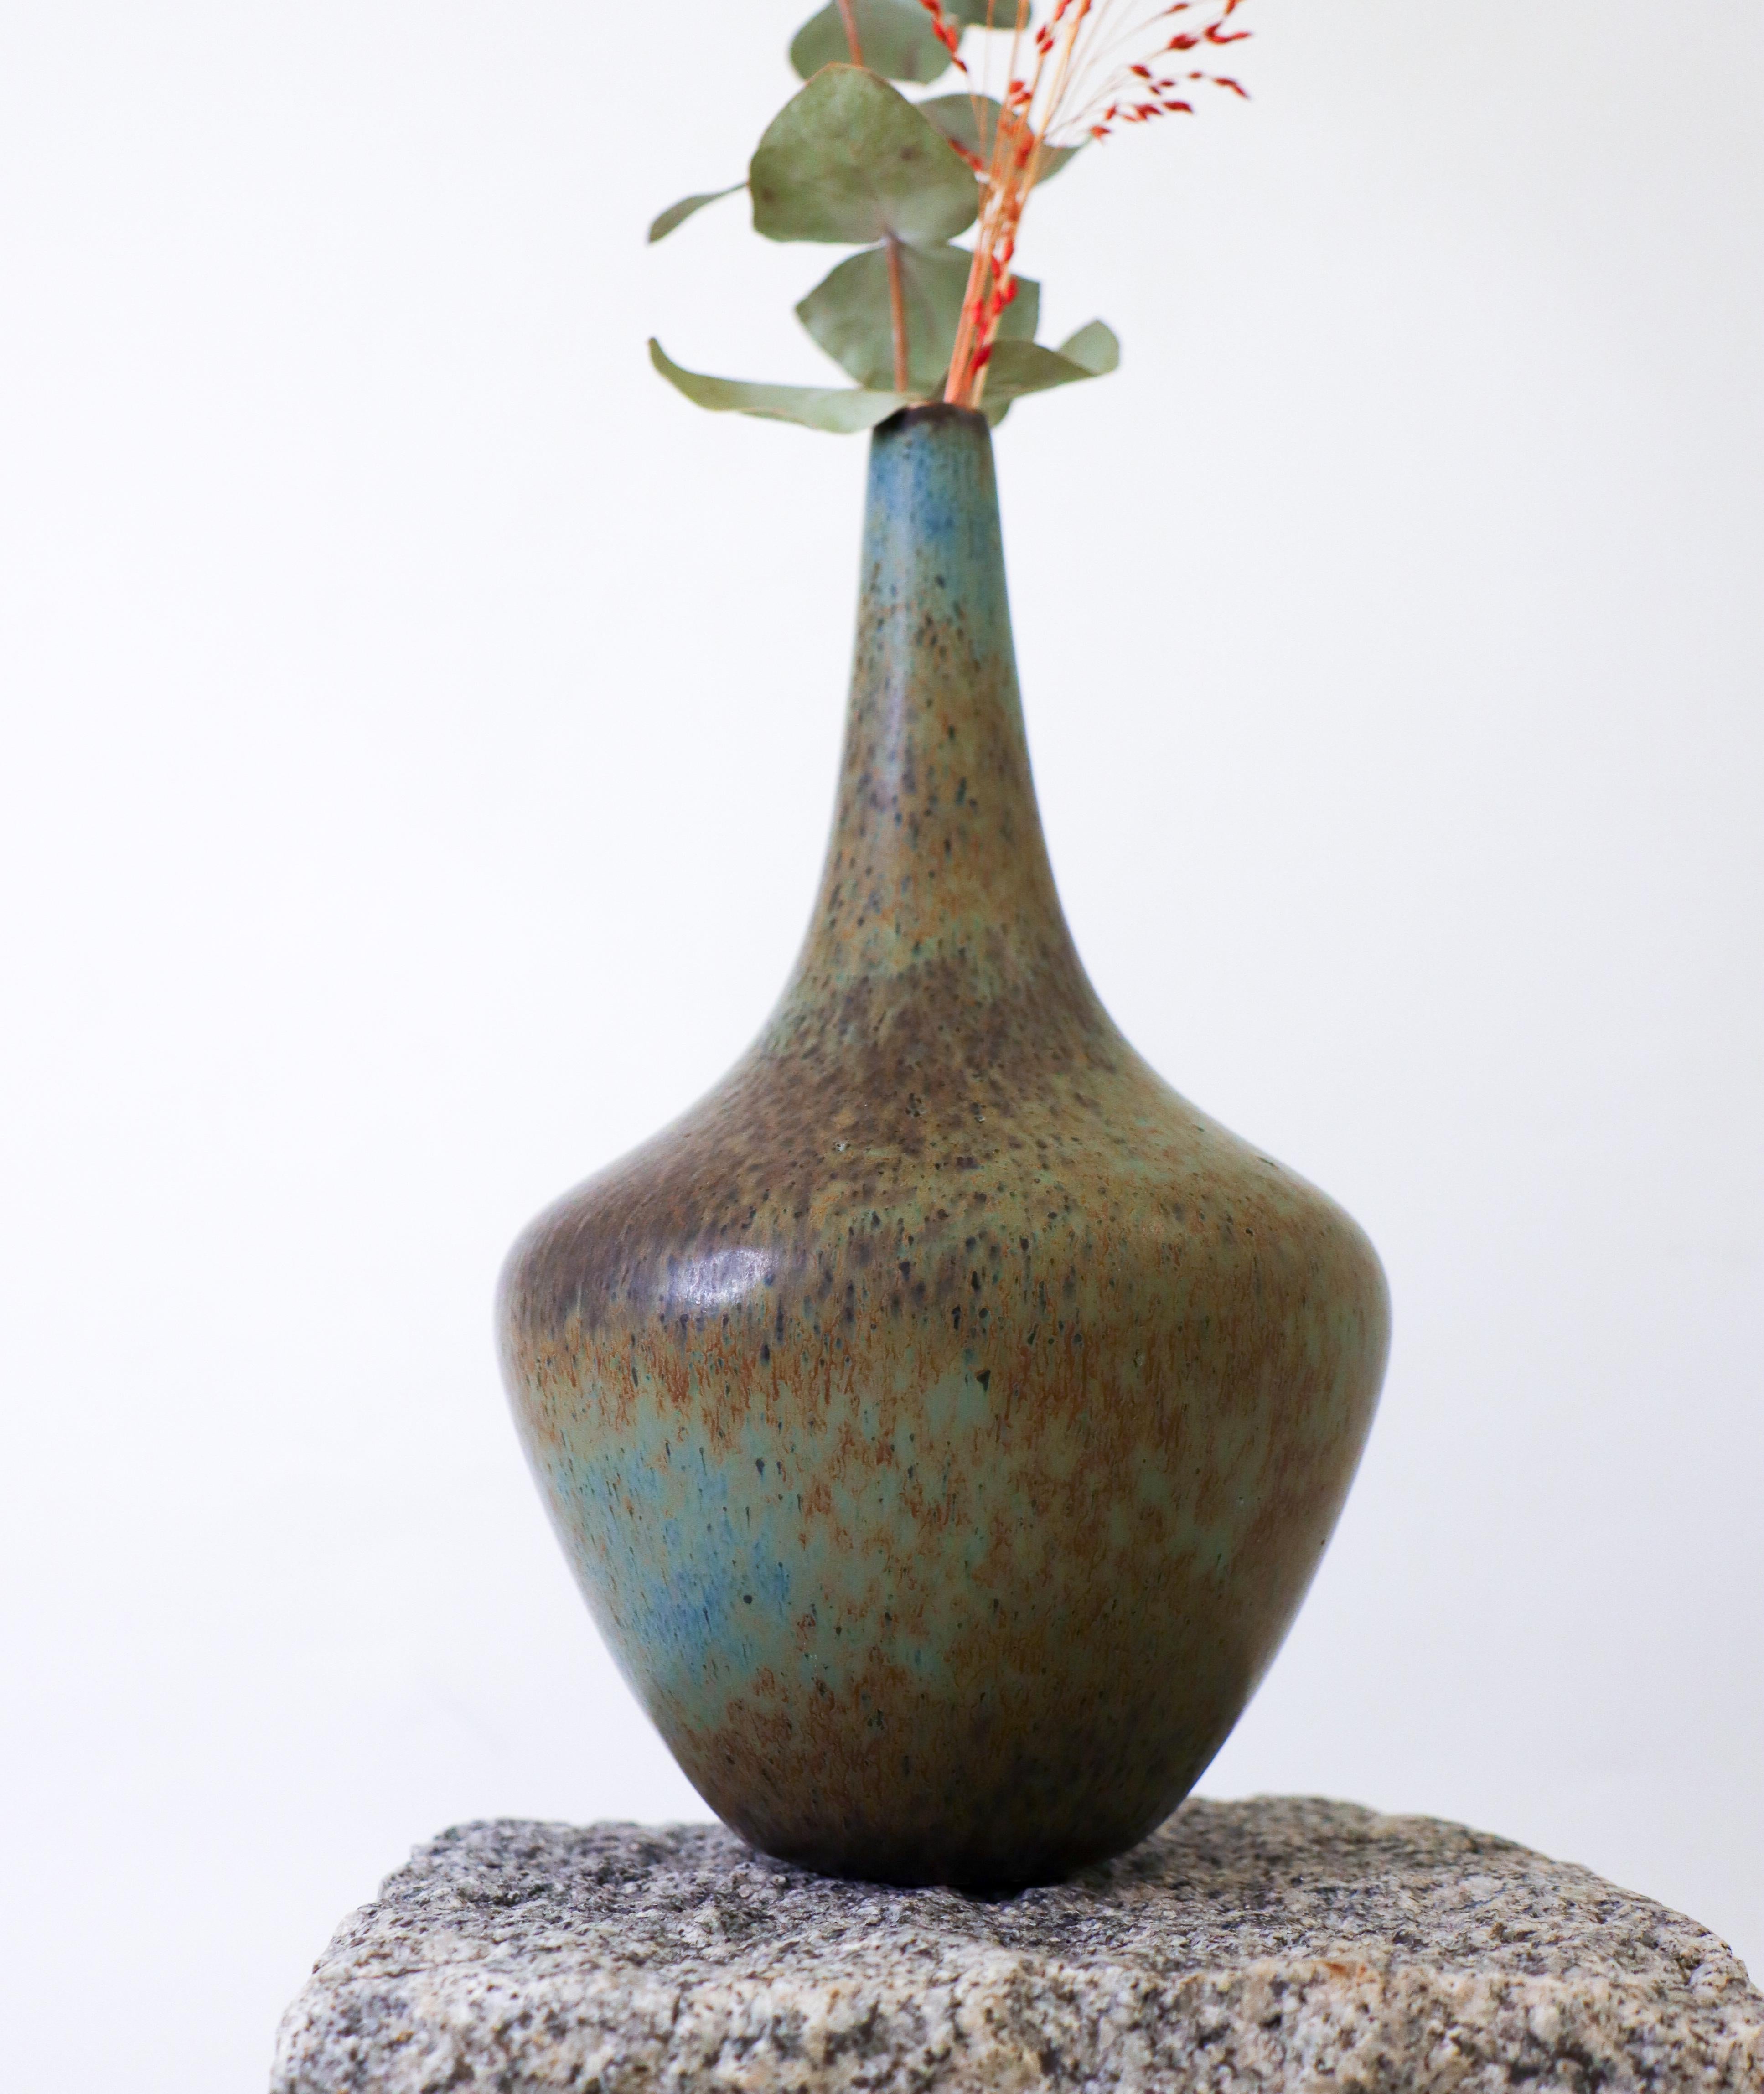 A green vase designed by Gunnar Nylund at Rörstrand, the vase is 23 cm (9.2